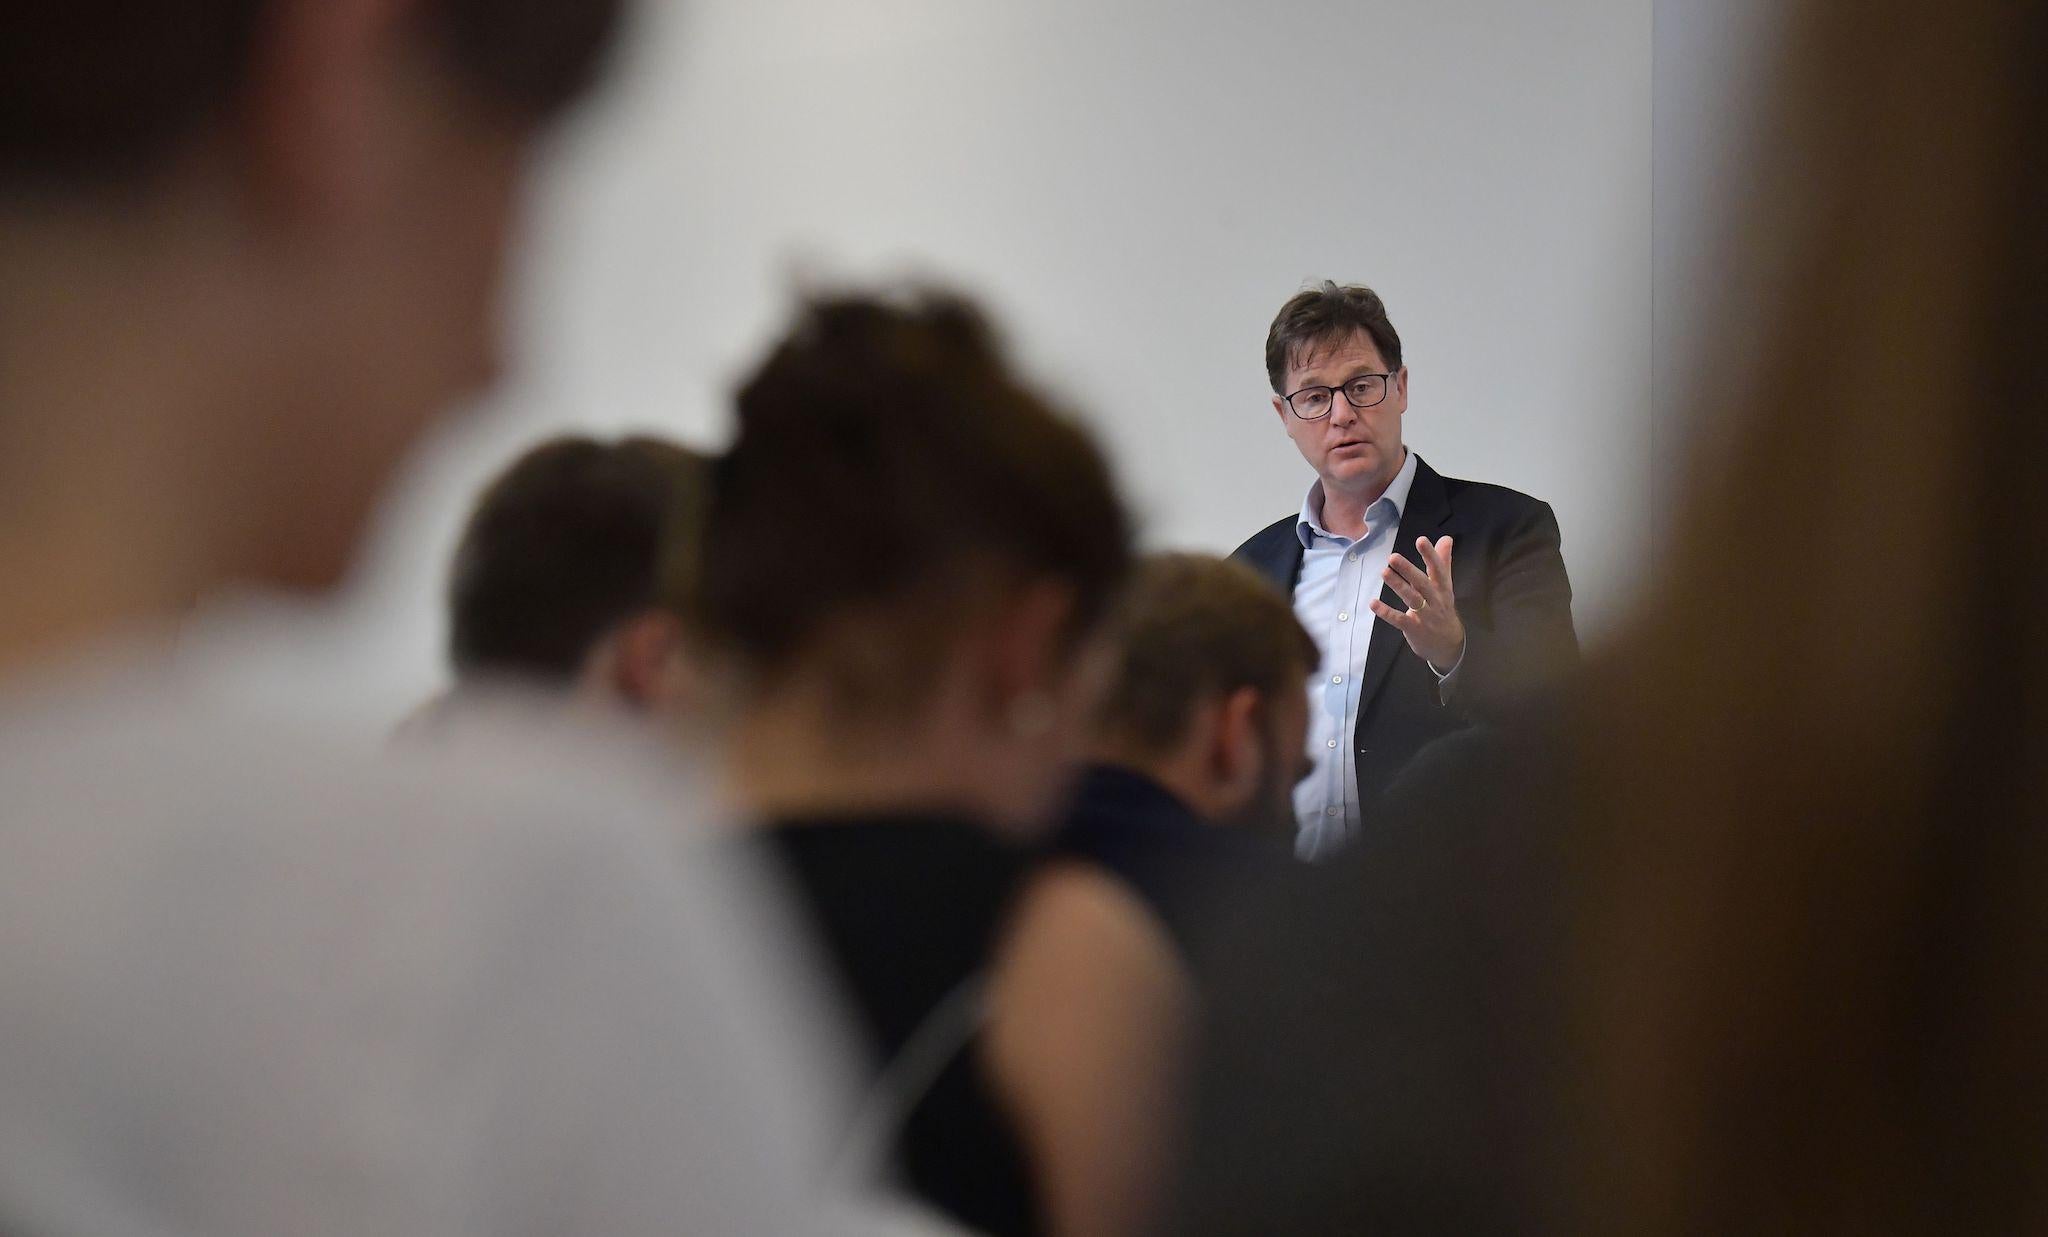 Facebook's vice president Nick Clegg holds a speech at the Hertie School of Governance in Berlin on June 24, 2019